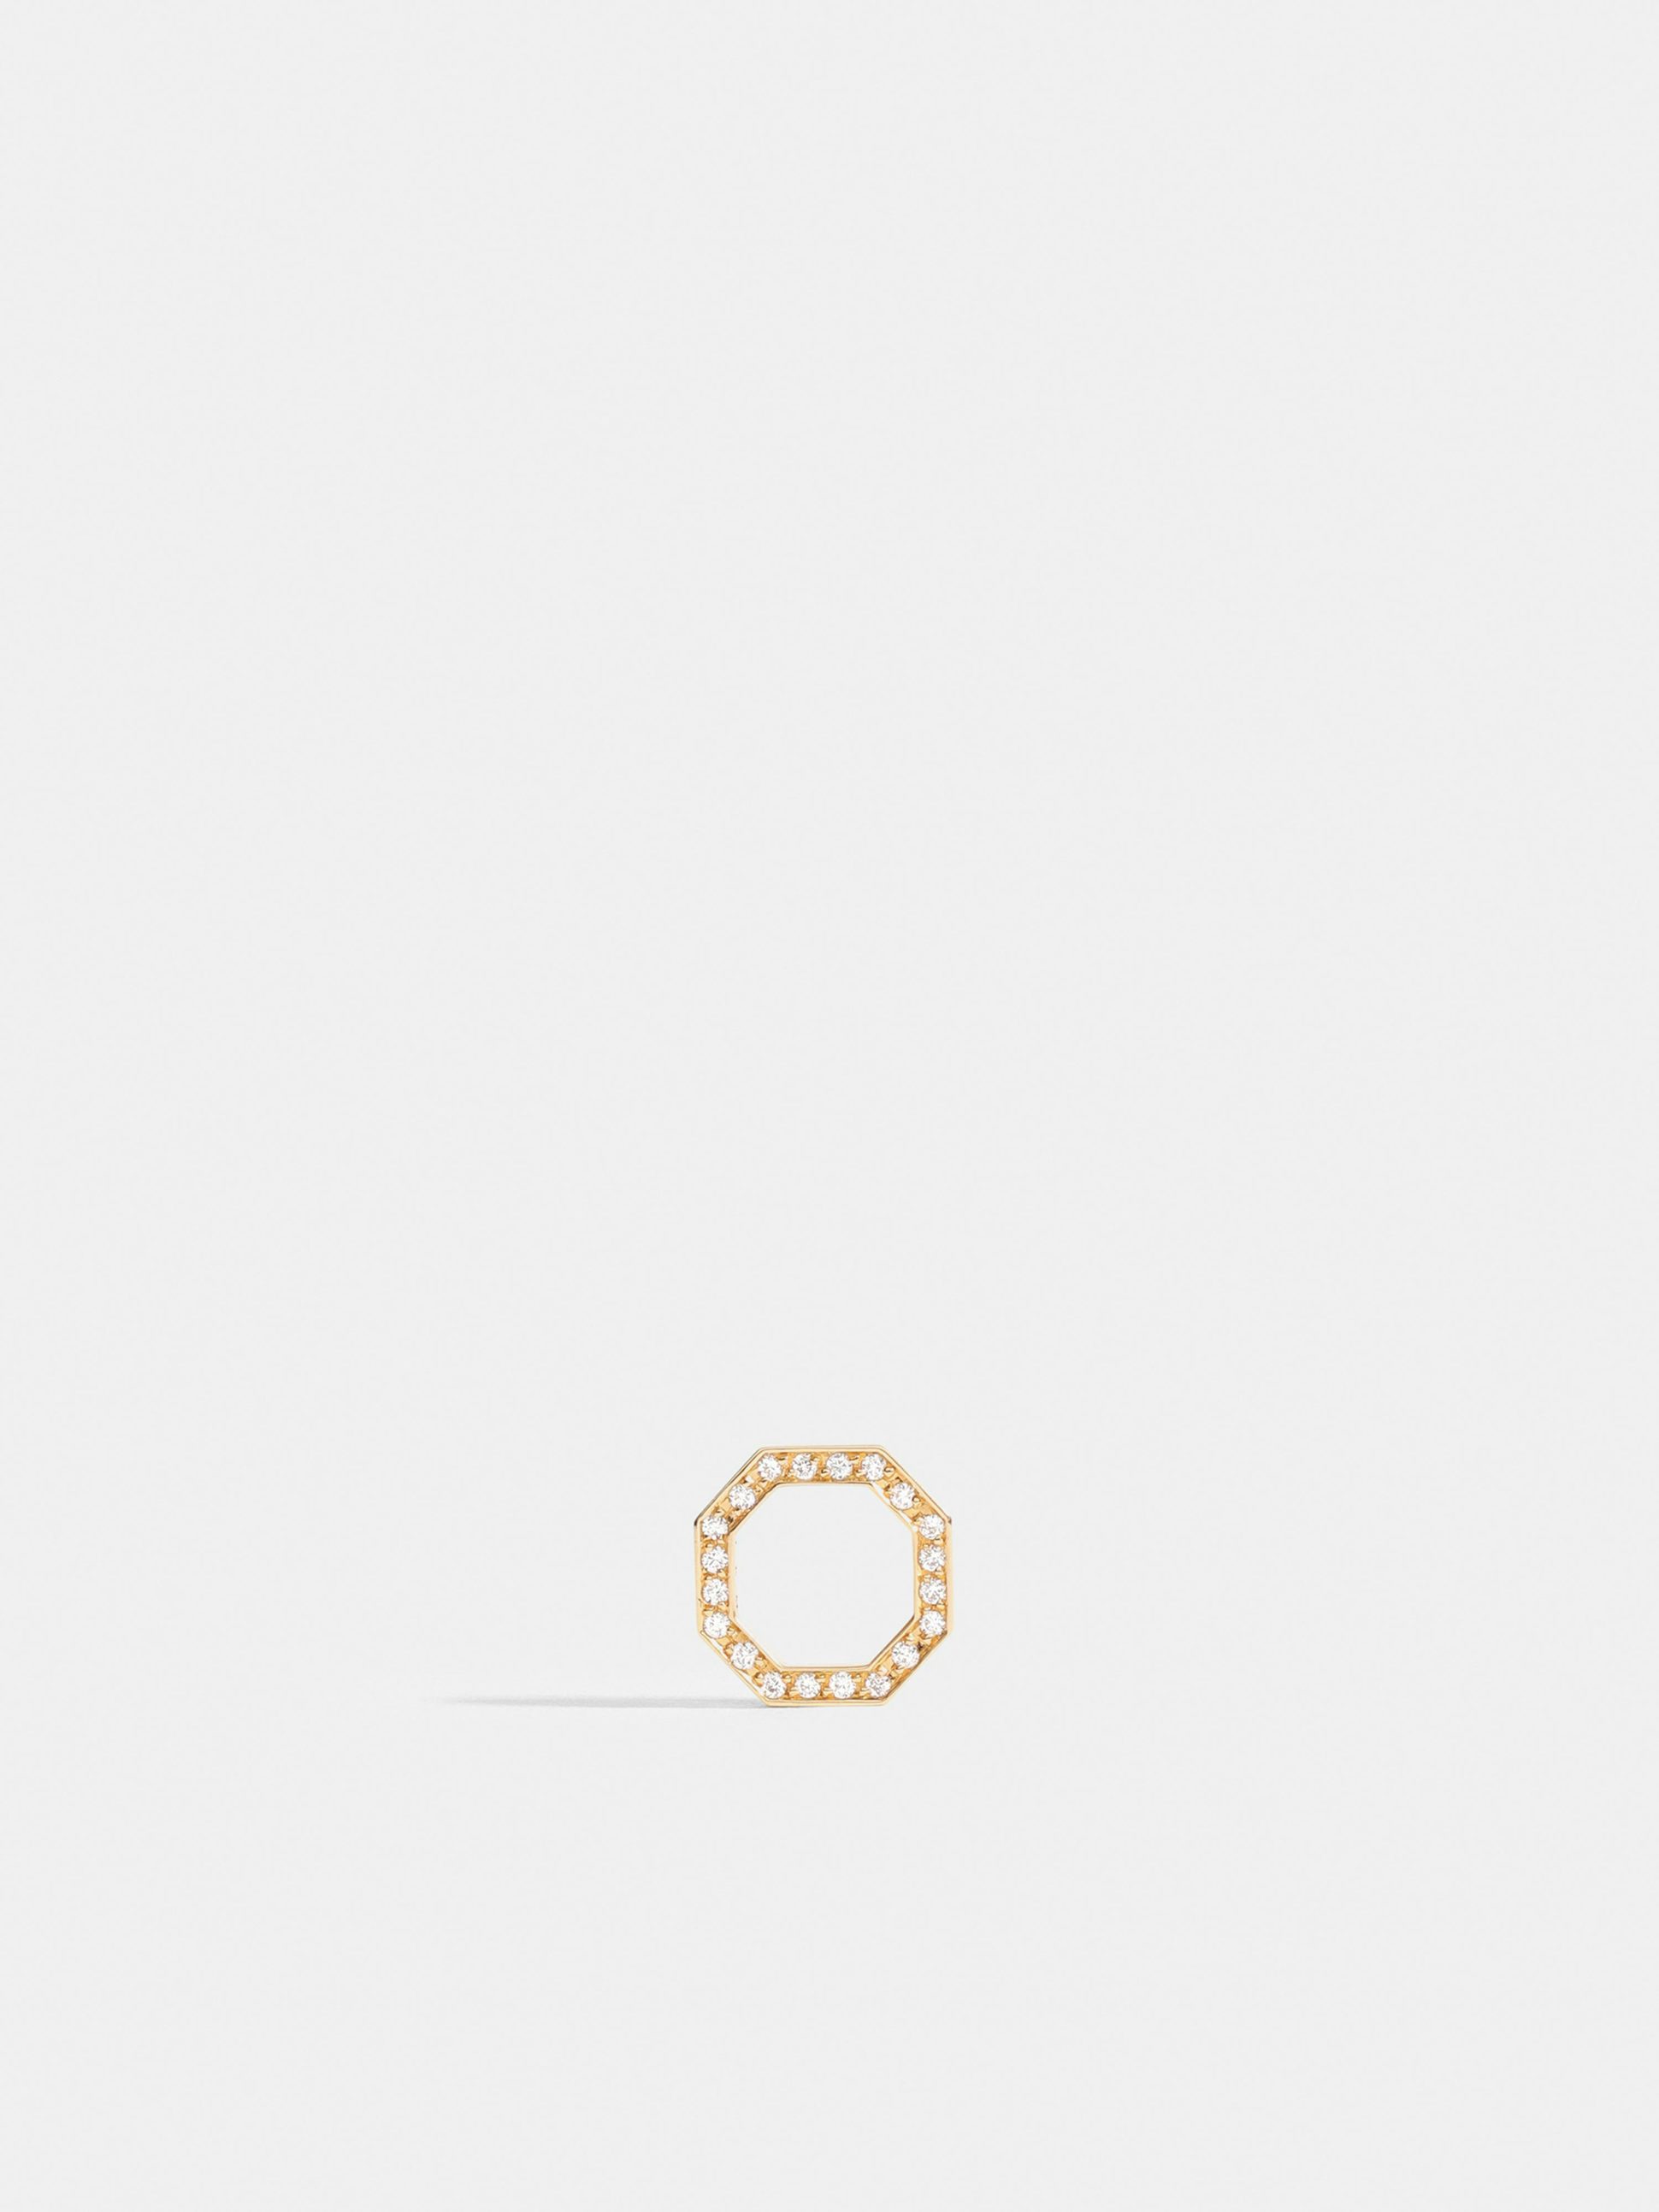 Octogone motif in 18k Fairmined ethical yellow gold, paved with lab-grown diamonds, on a cord.